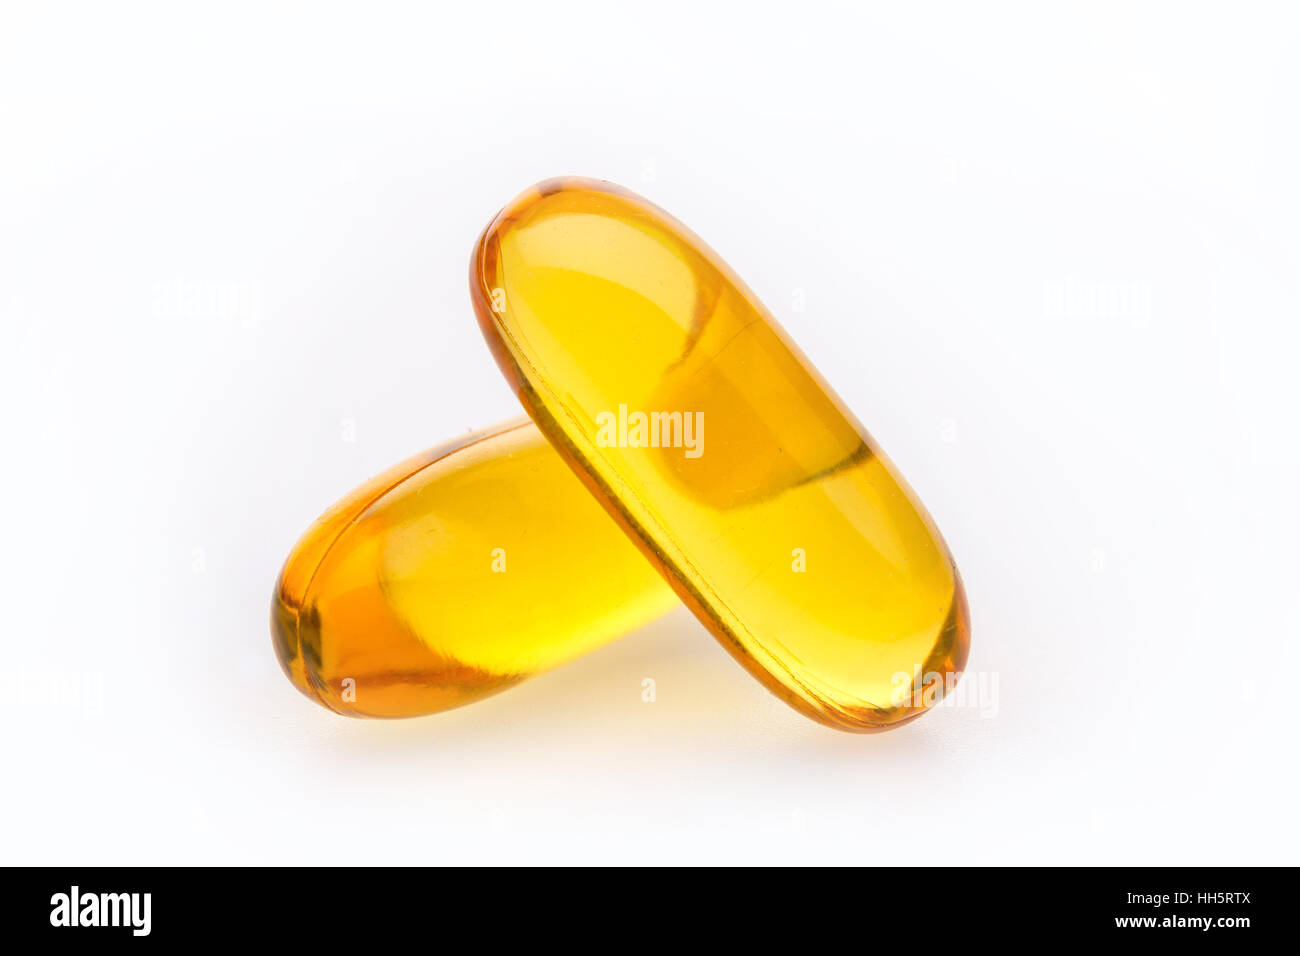 Cod Liver Oil capsules against a white background Stock Photo